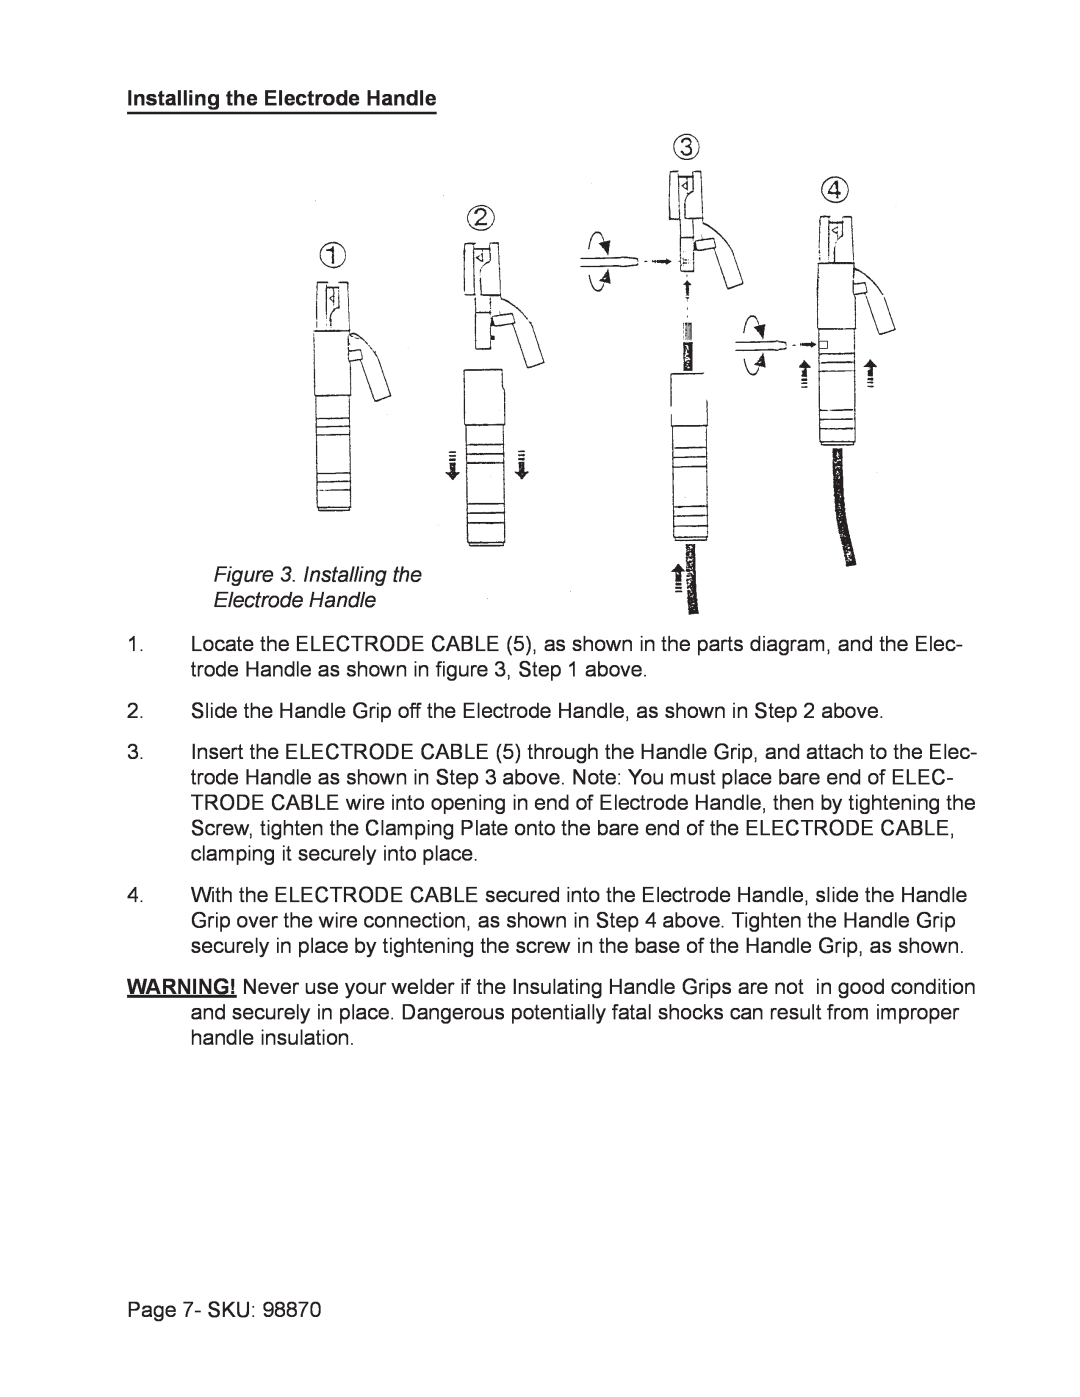 Harbor Freight Tools 98870 operating instructions Installing the Electrode Handle 